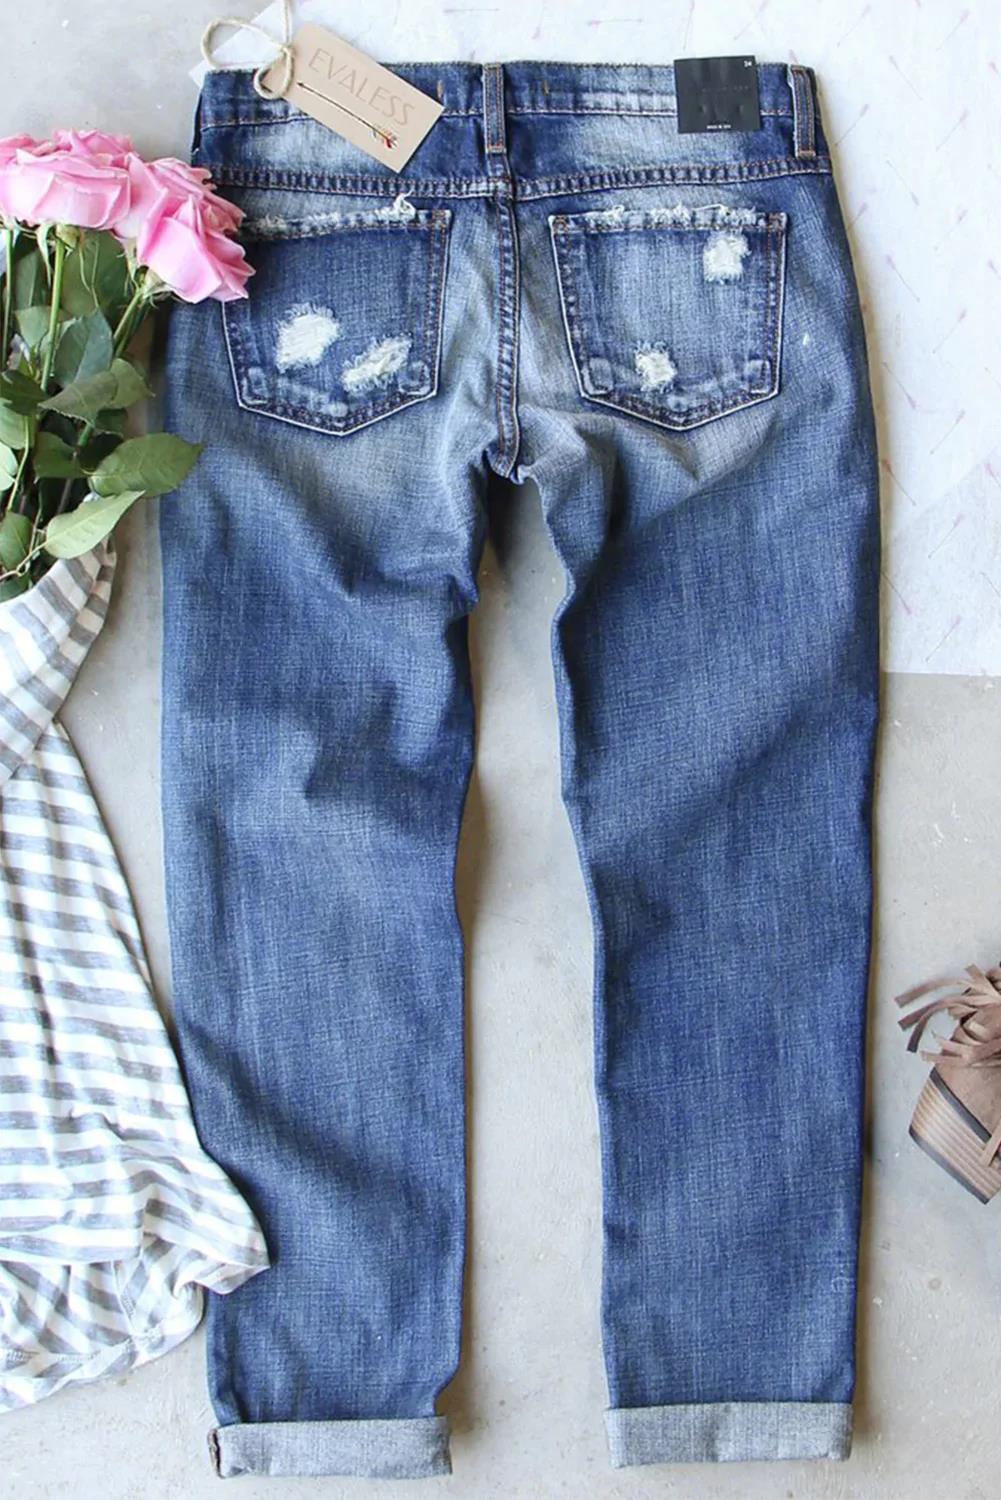 Blue Floral Graphic Print Mid Waist Ripped Jeans $ 43.99 - Evaless